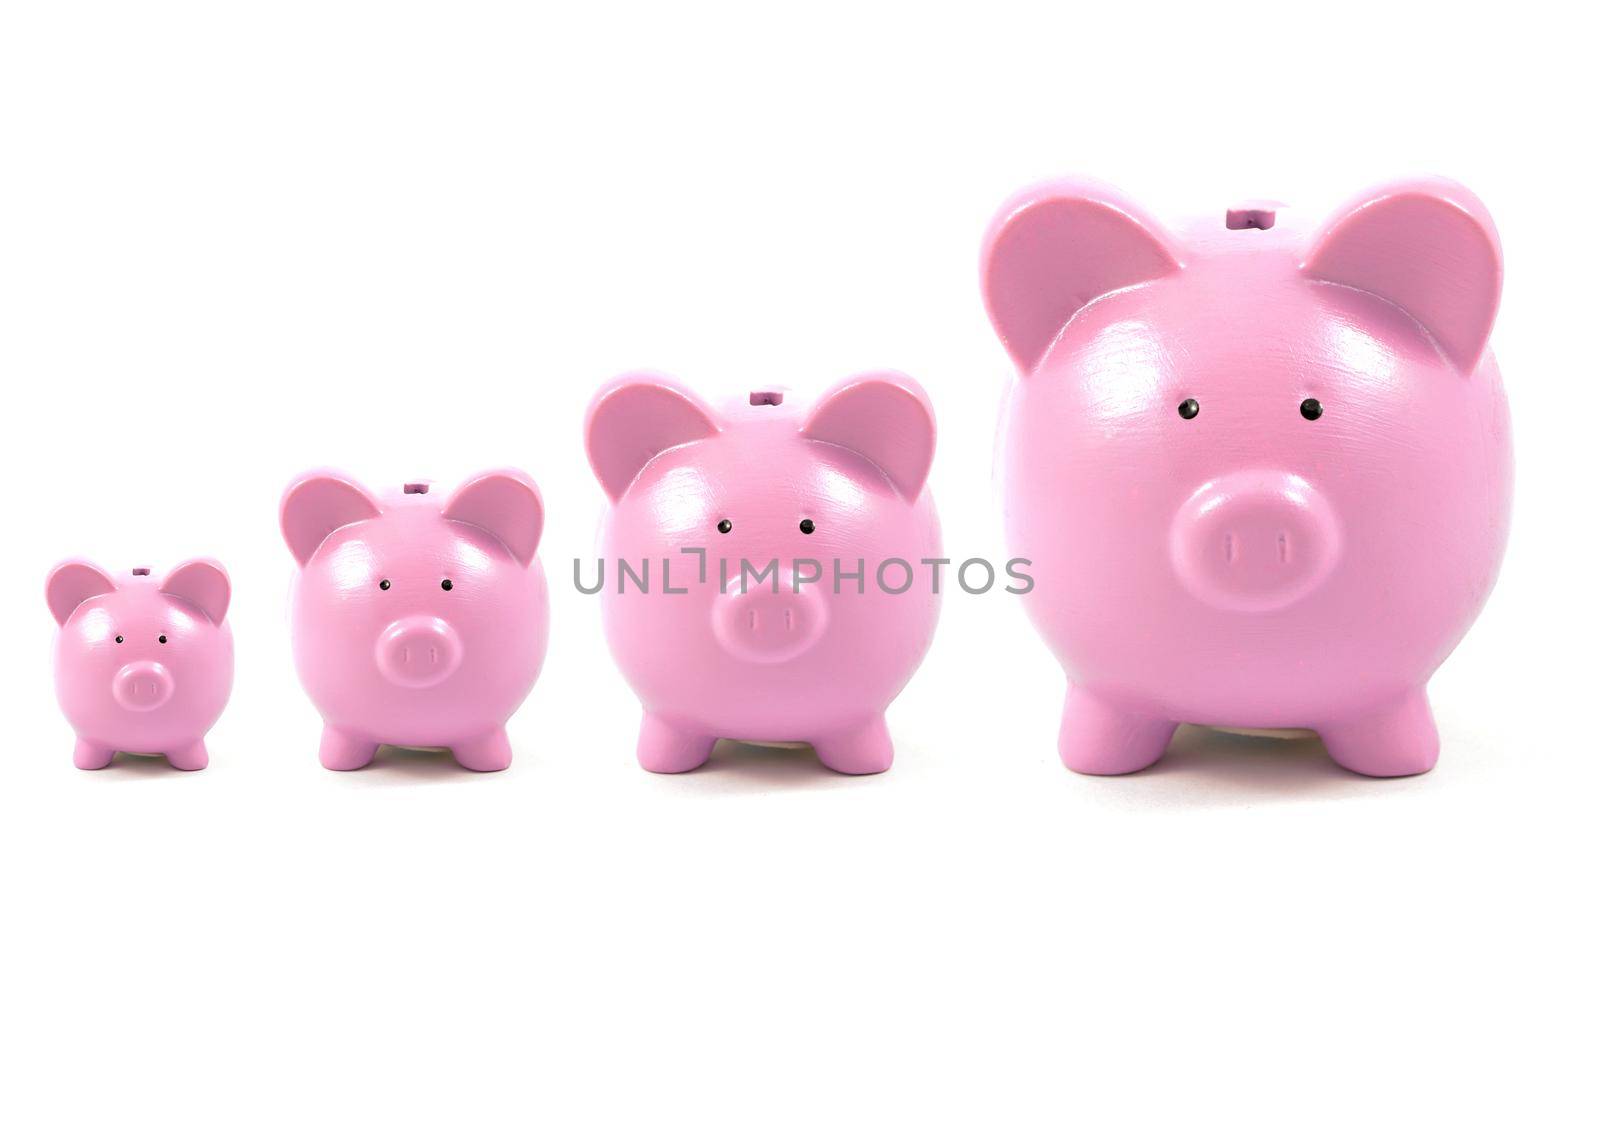 A conceptual image of pink piggy banks growing in size over time to illustrate the growth of savings.